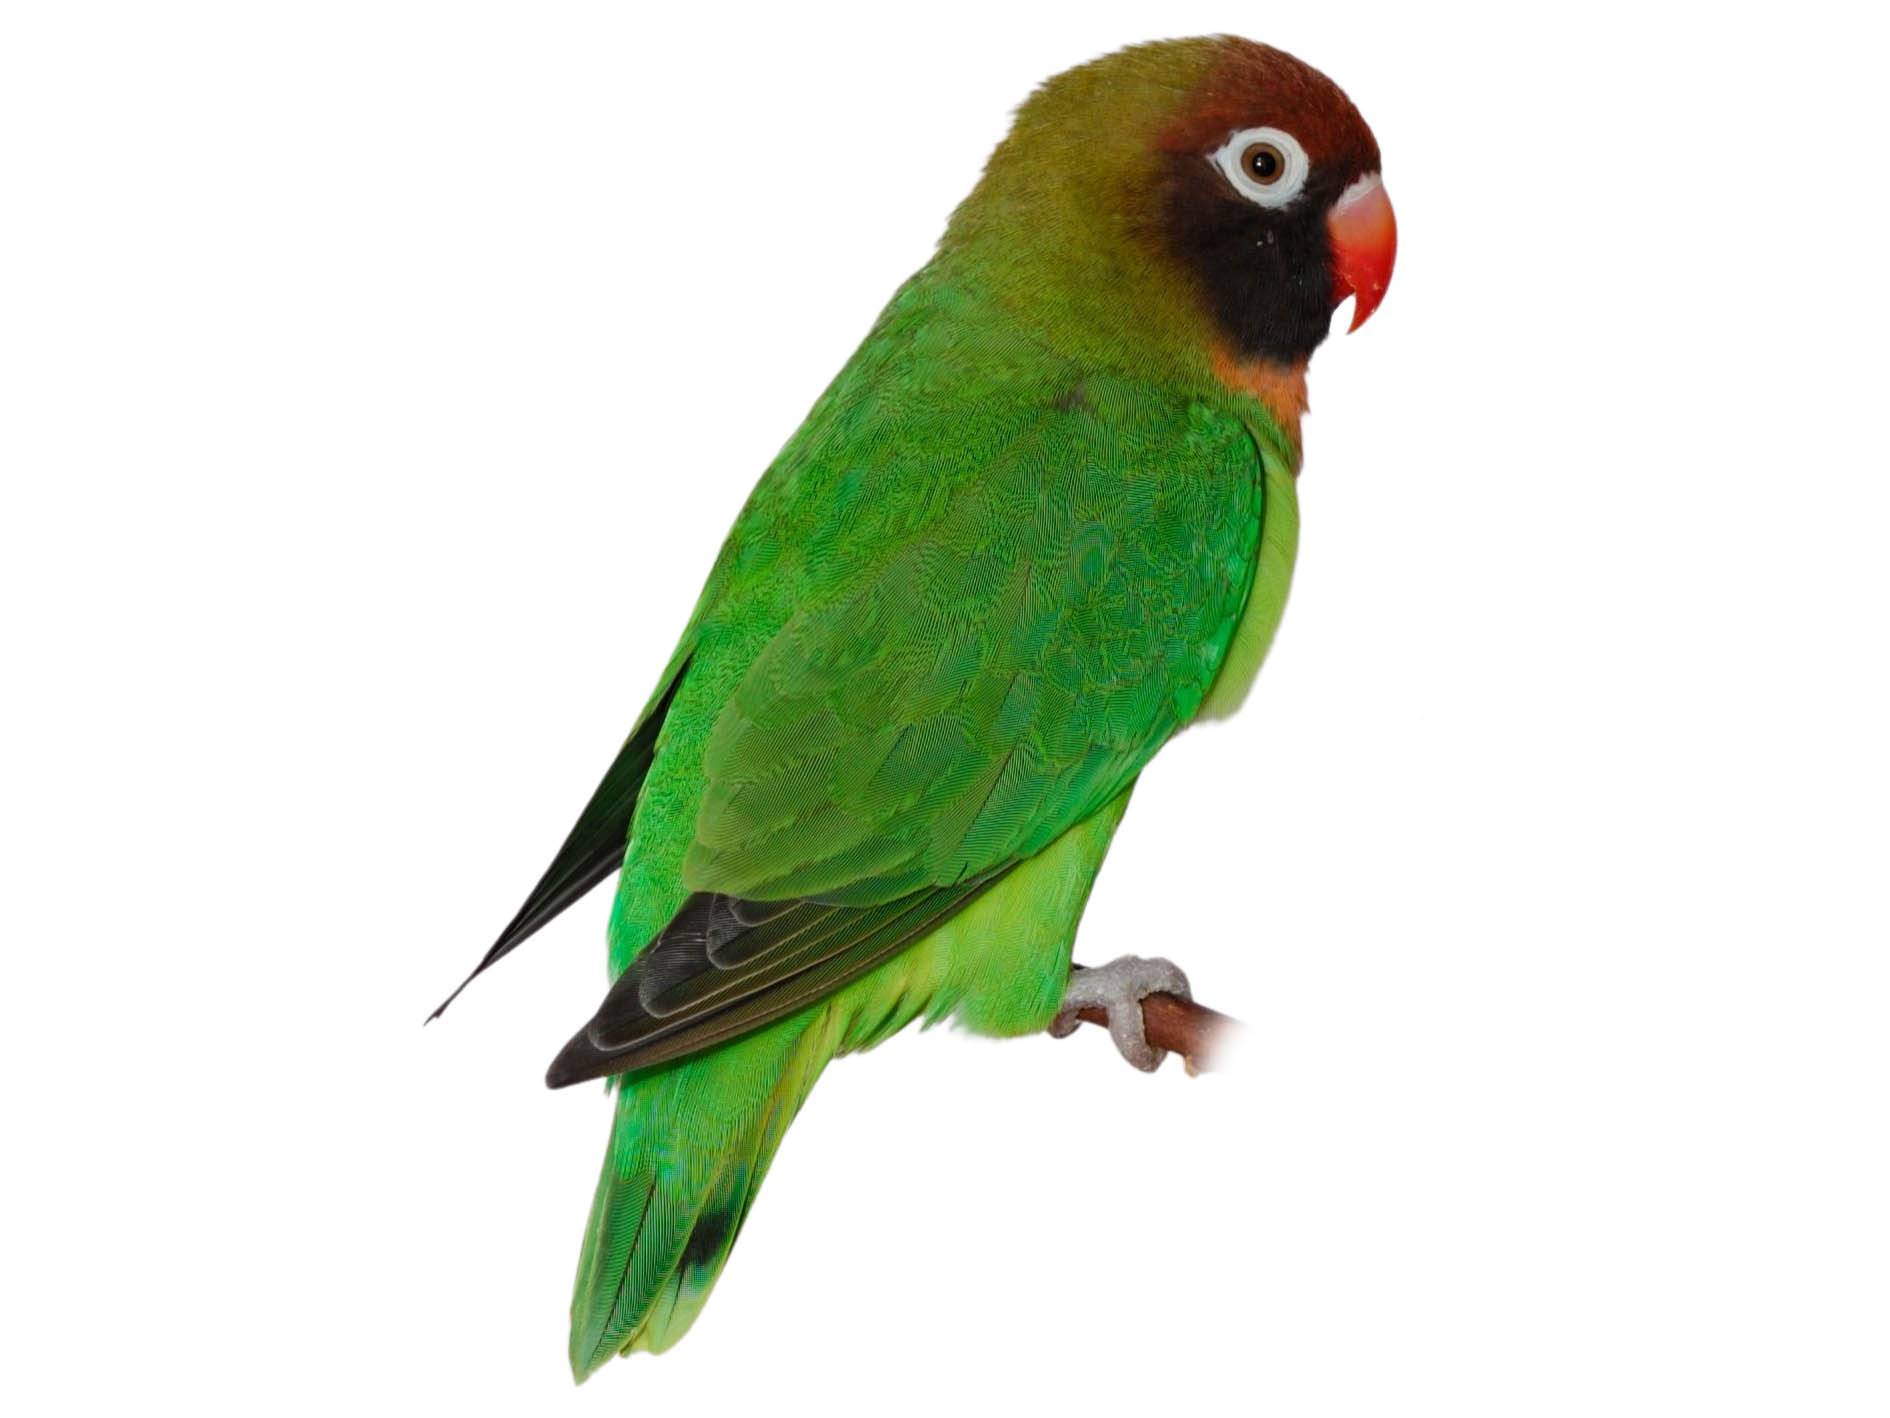 A photo of a Black-cheeked Lovebird (Agapornis nigrigenis)